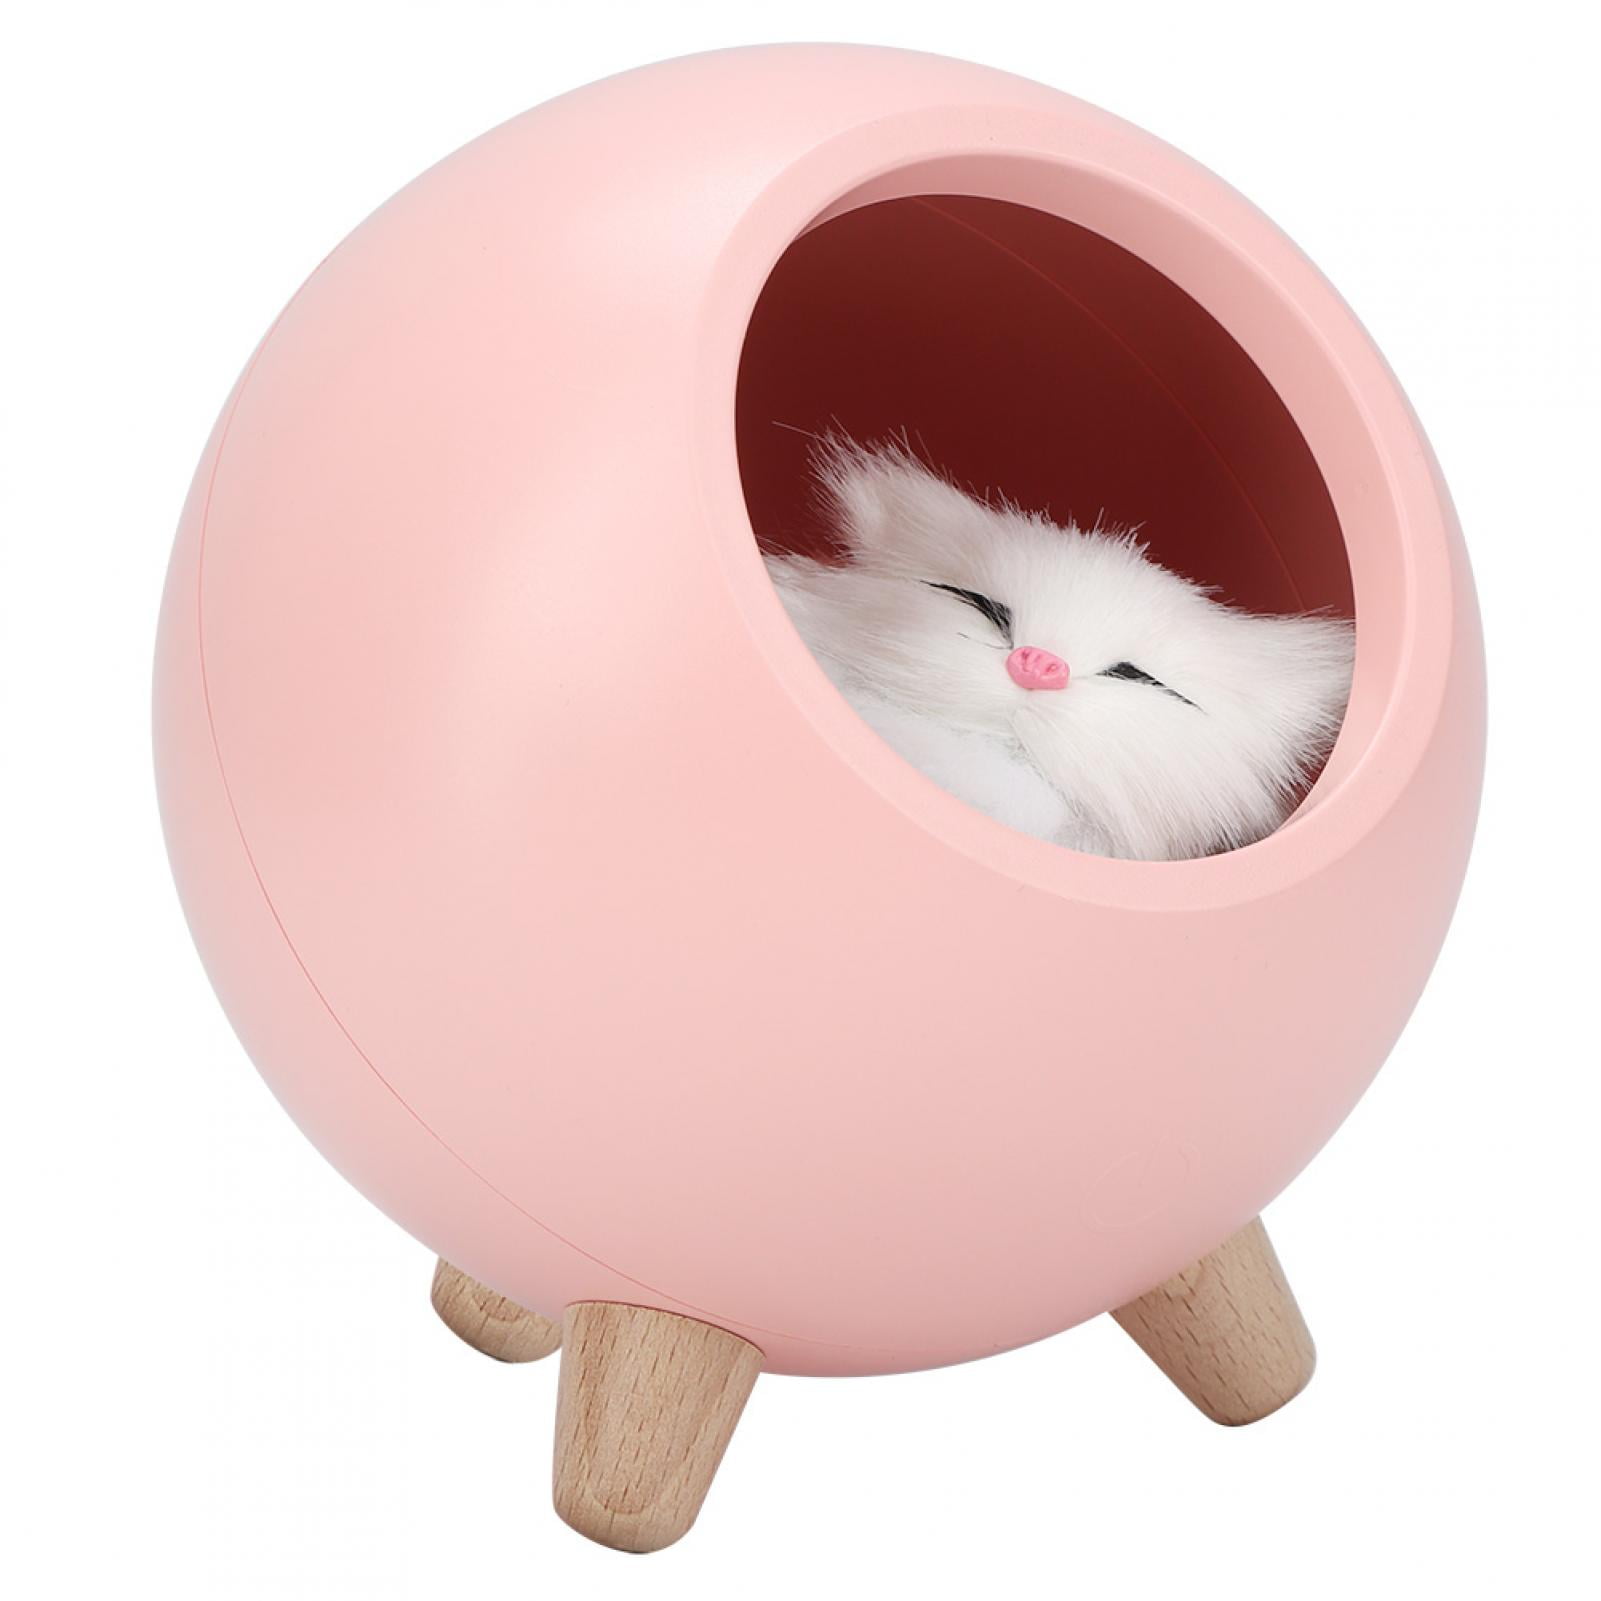 Cat Lamp,Cat Stuff,Cute Night Light,7 Colors Timing Remote & Touch,Cat Gifts  for Cat Lovers,Cat Gifts for Girls,Gifts for Girls 5-7 8-10 10-12,6 7 8 9 10  12 Year Old Girl Gifts